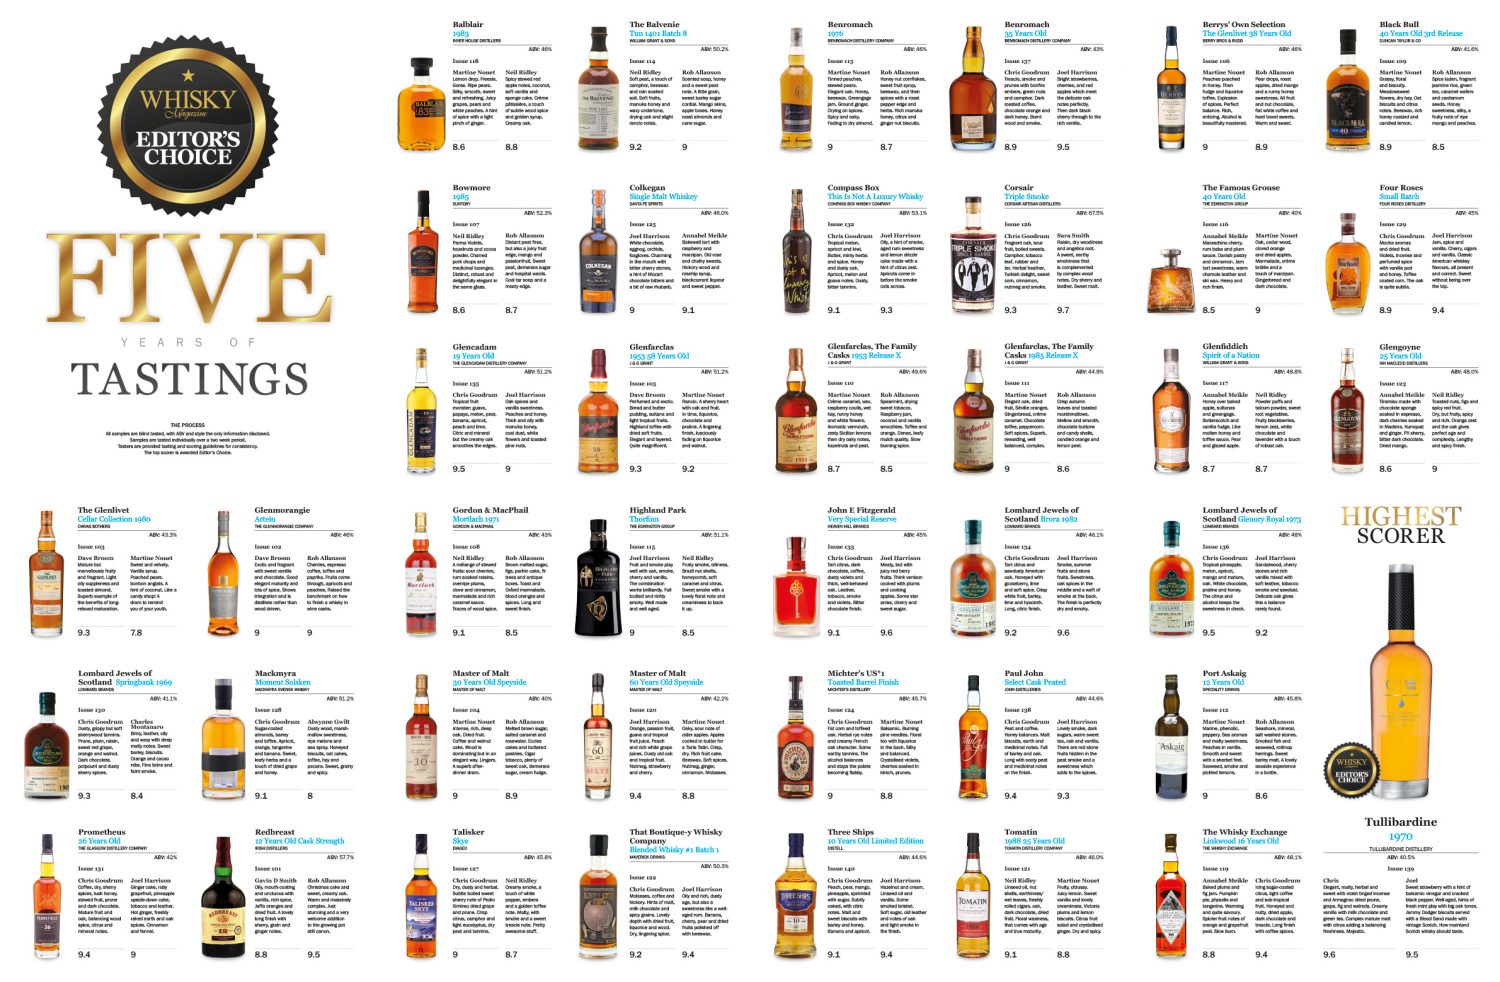 Five Years Of Tastings Poster Whisky Magazine